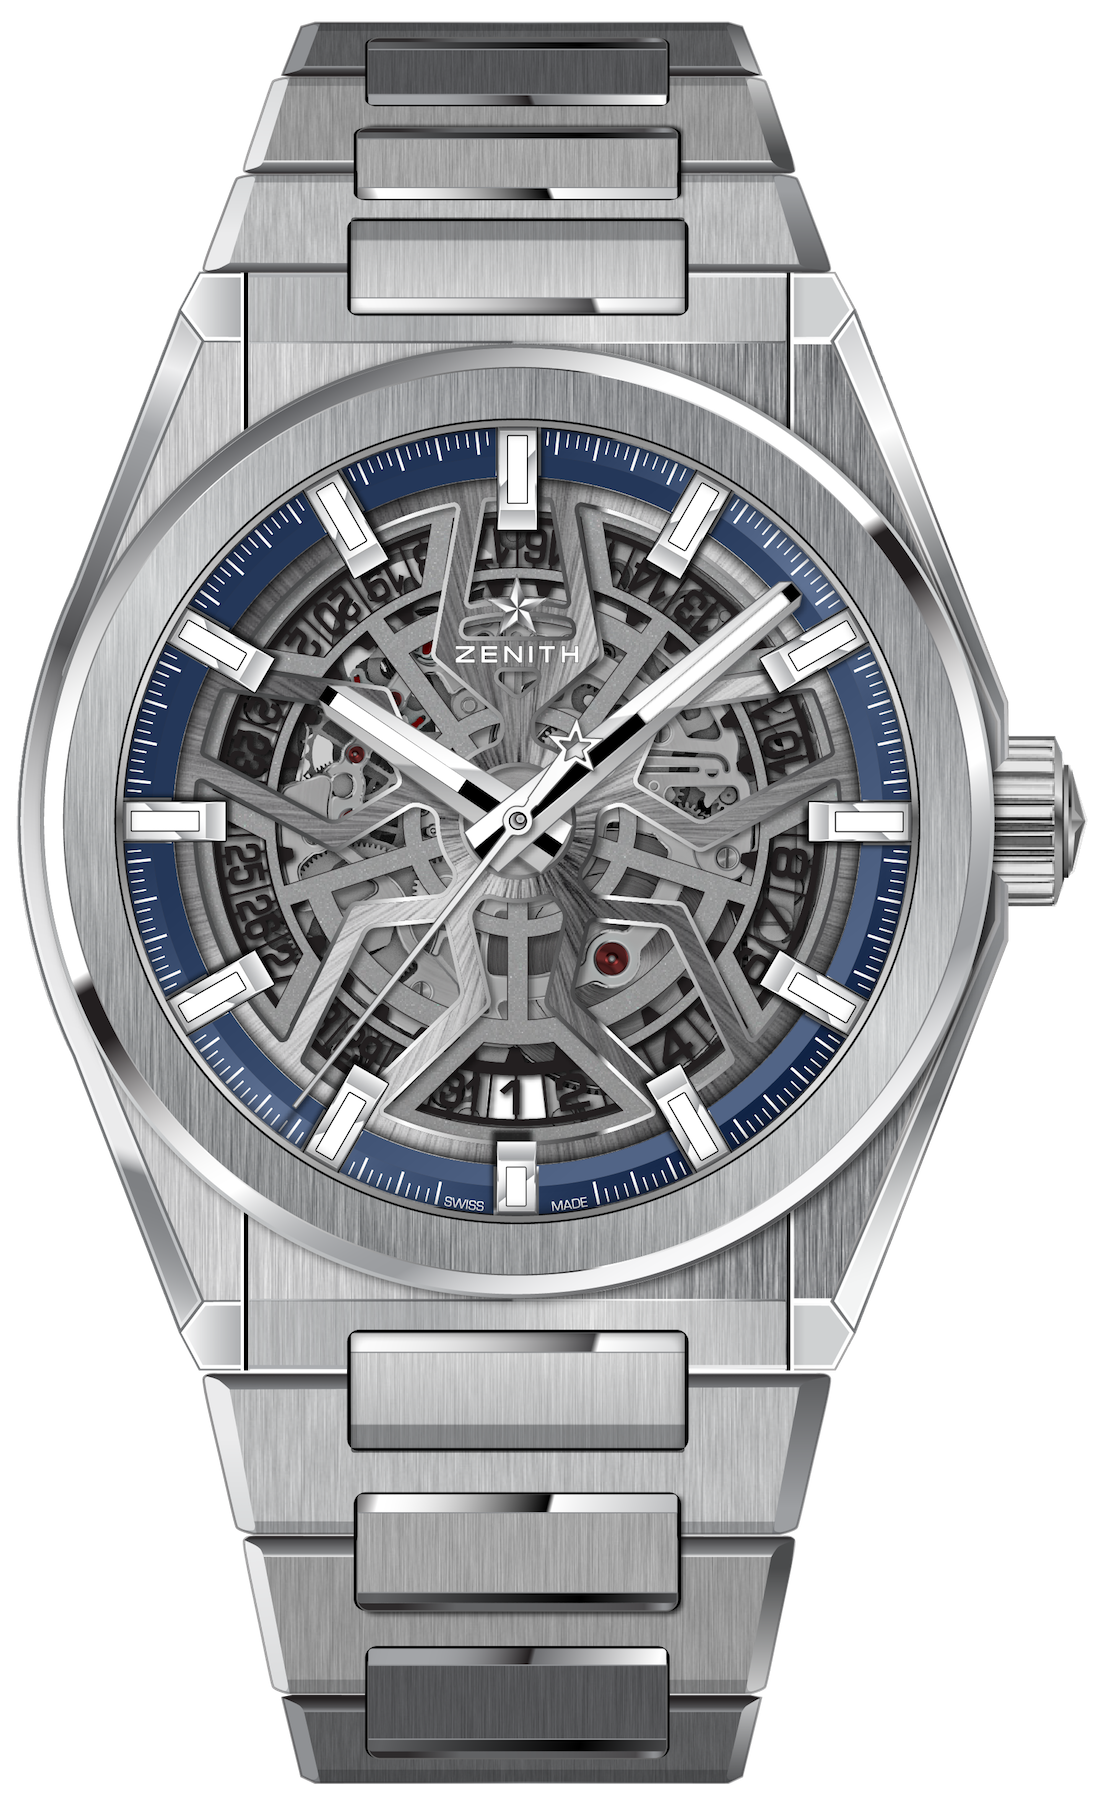 Introducing - Zenith Defy Classic - Baselworld 2018 (Specs & Price)